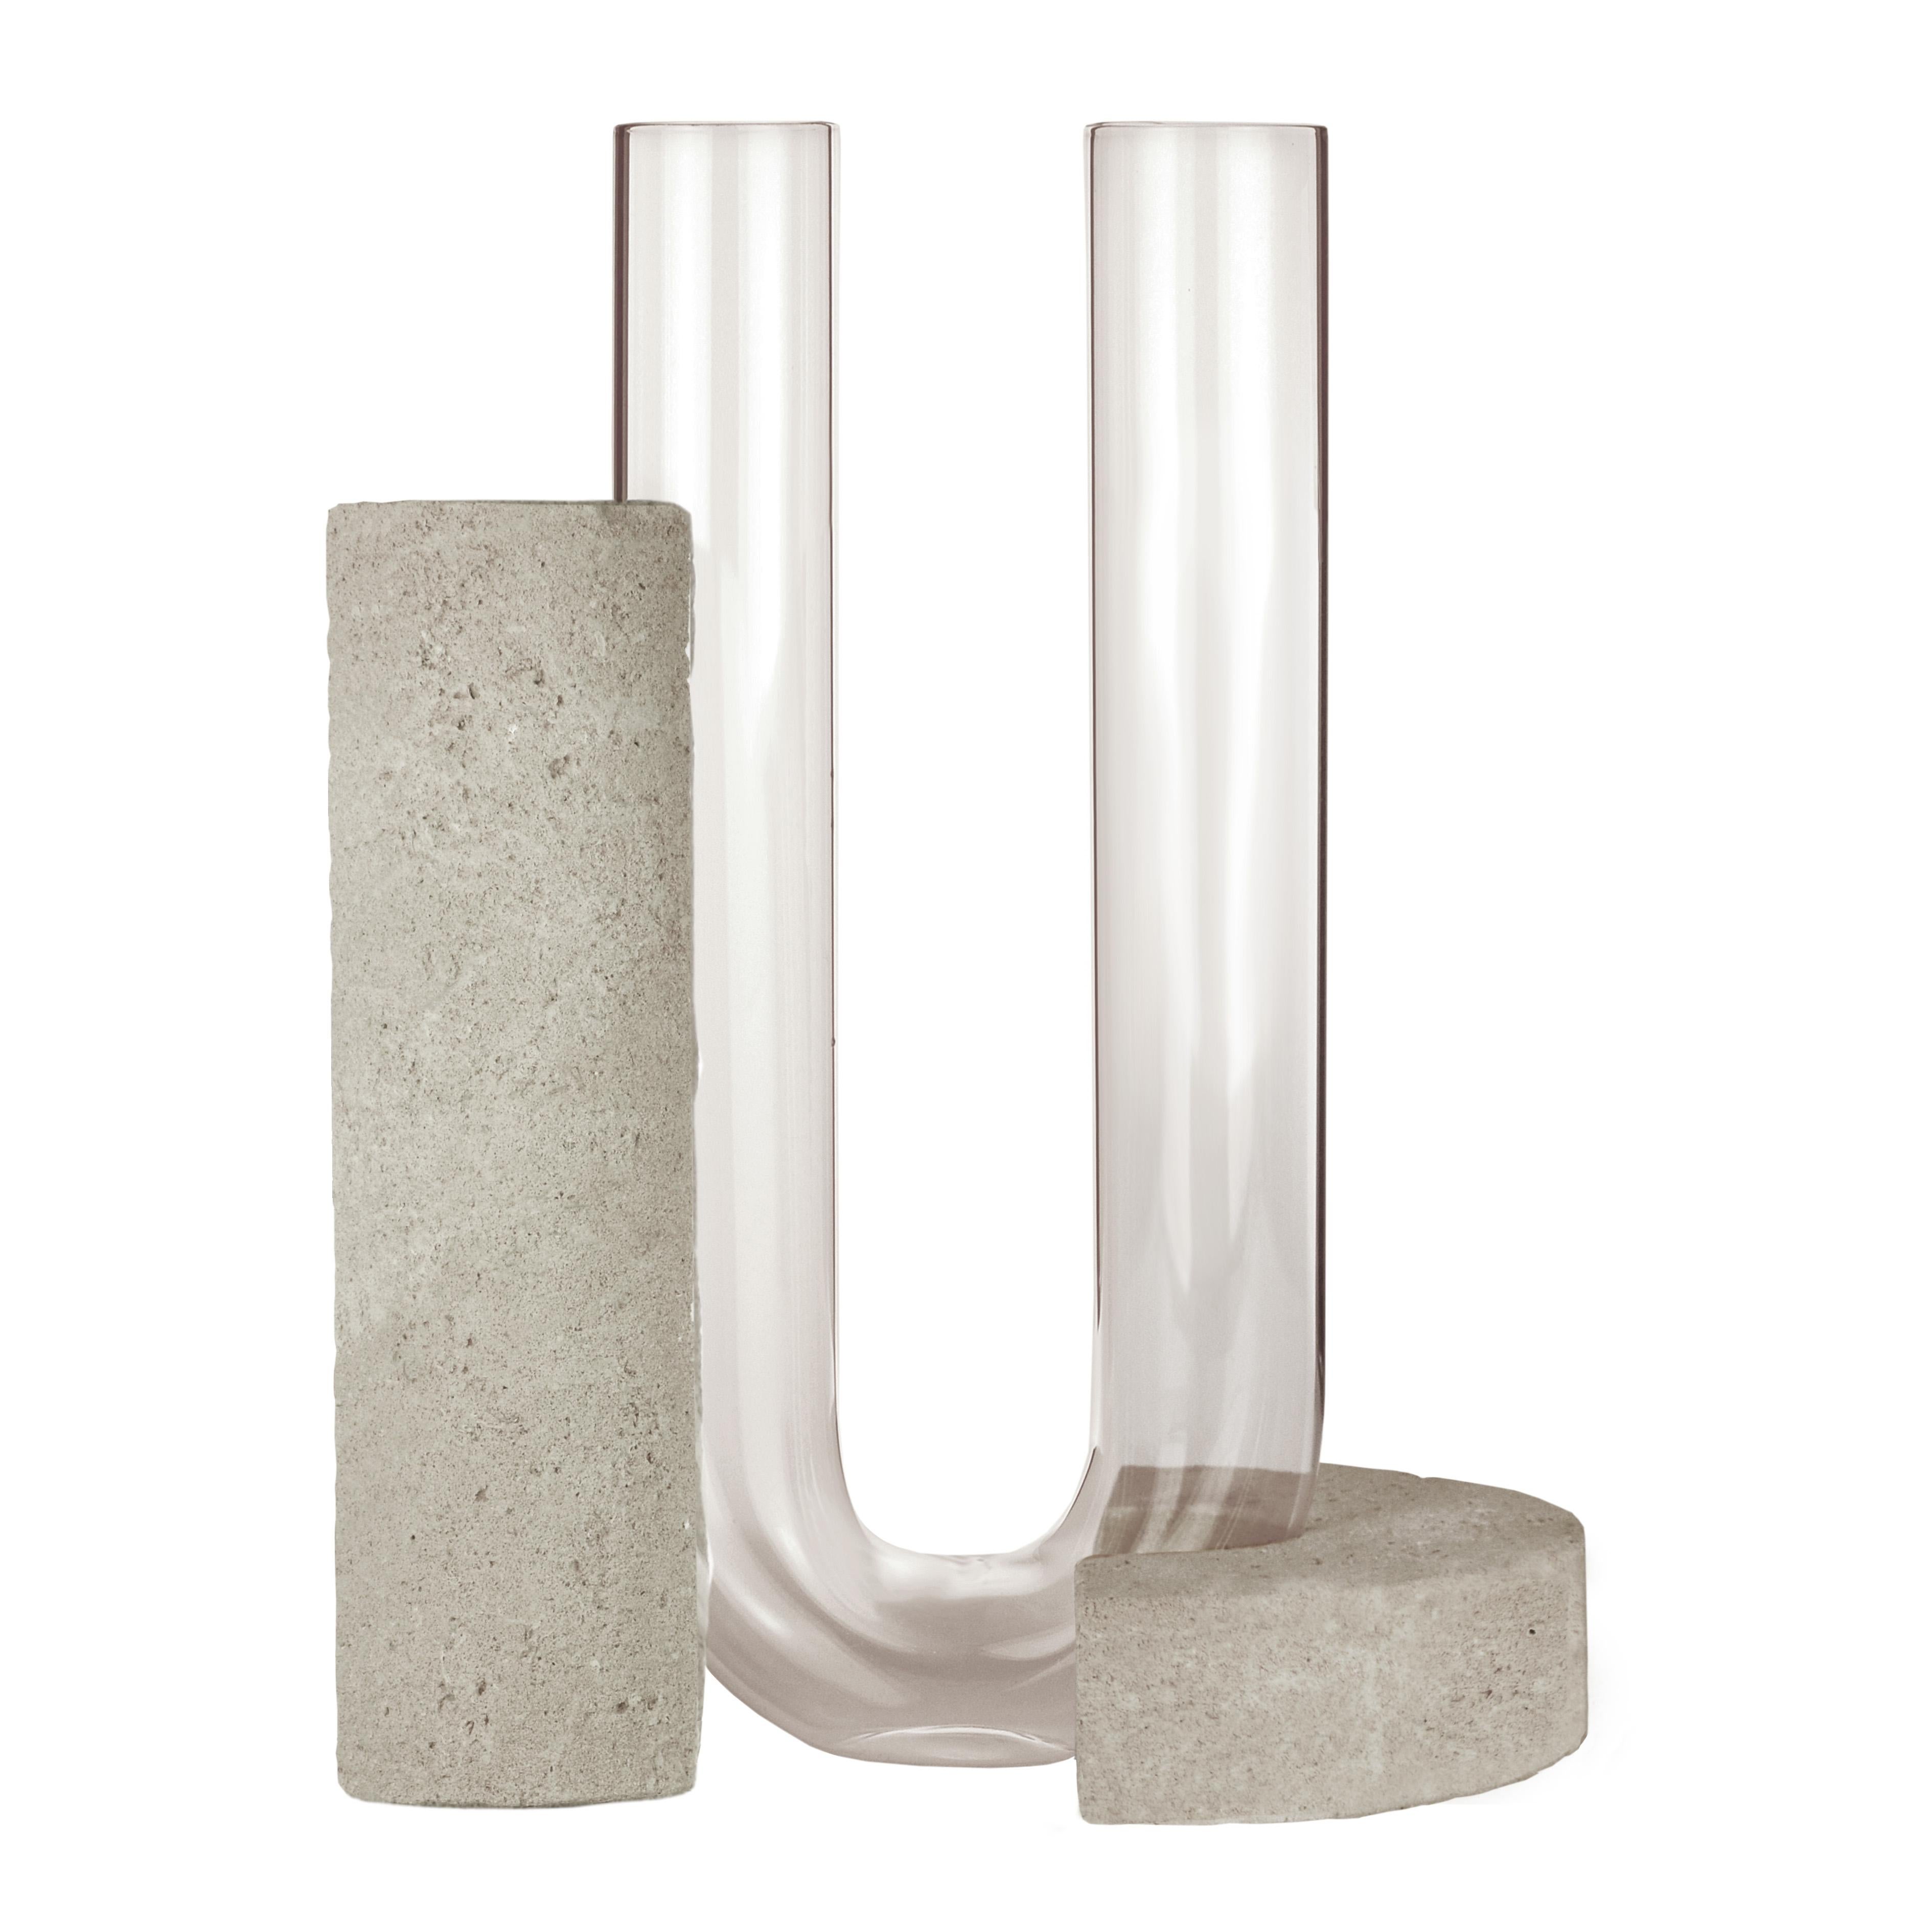 Grey-smoked Cochlea della Consapevolezza soils edition vase by Coki Barbieri
Dimensions: W 24 x D 14 x H 30 cm.
Materials: Handcrafted stone made with Matera stone fragments, sedimentary rocks of the Italian Apennines and pure water, black mineral